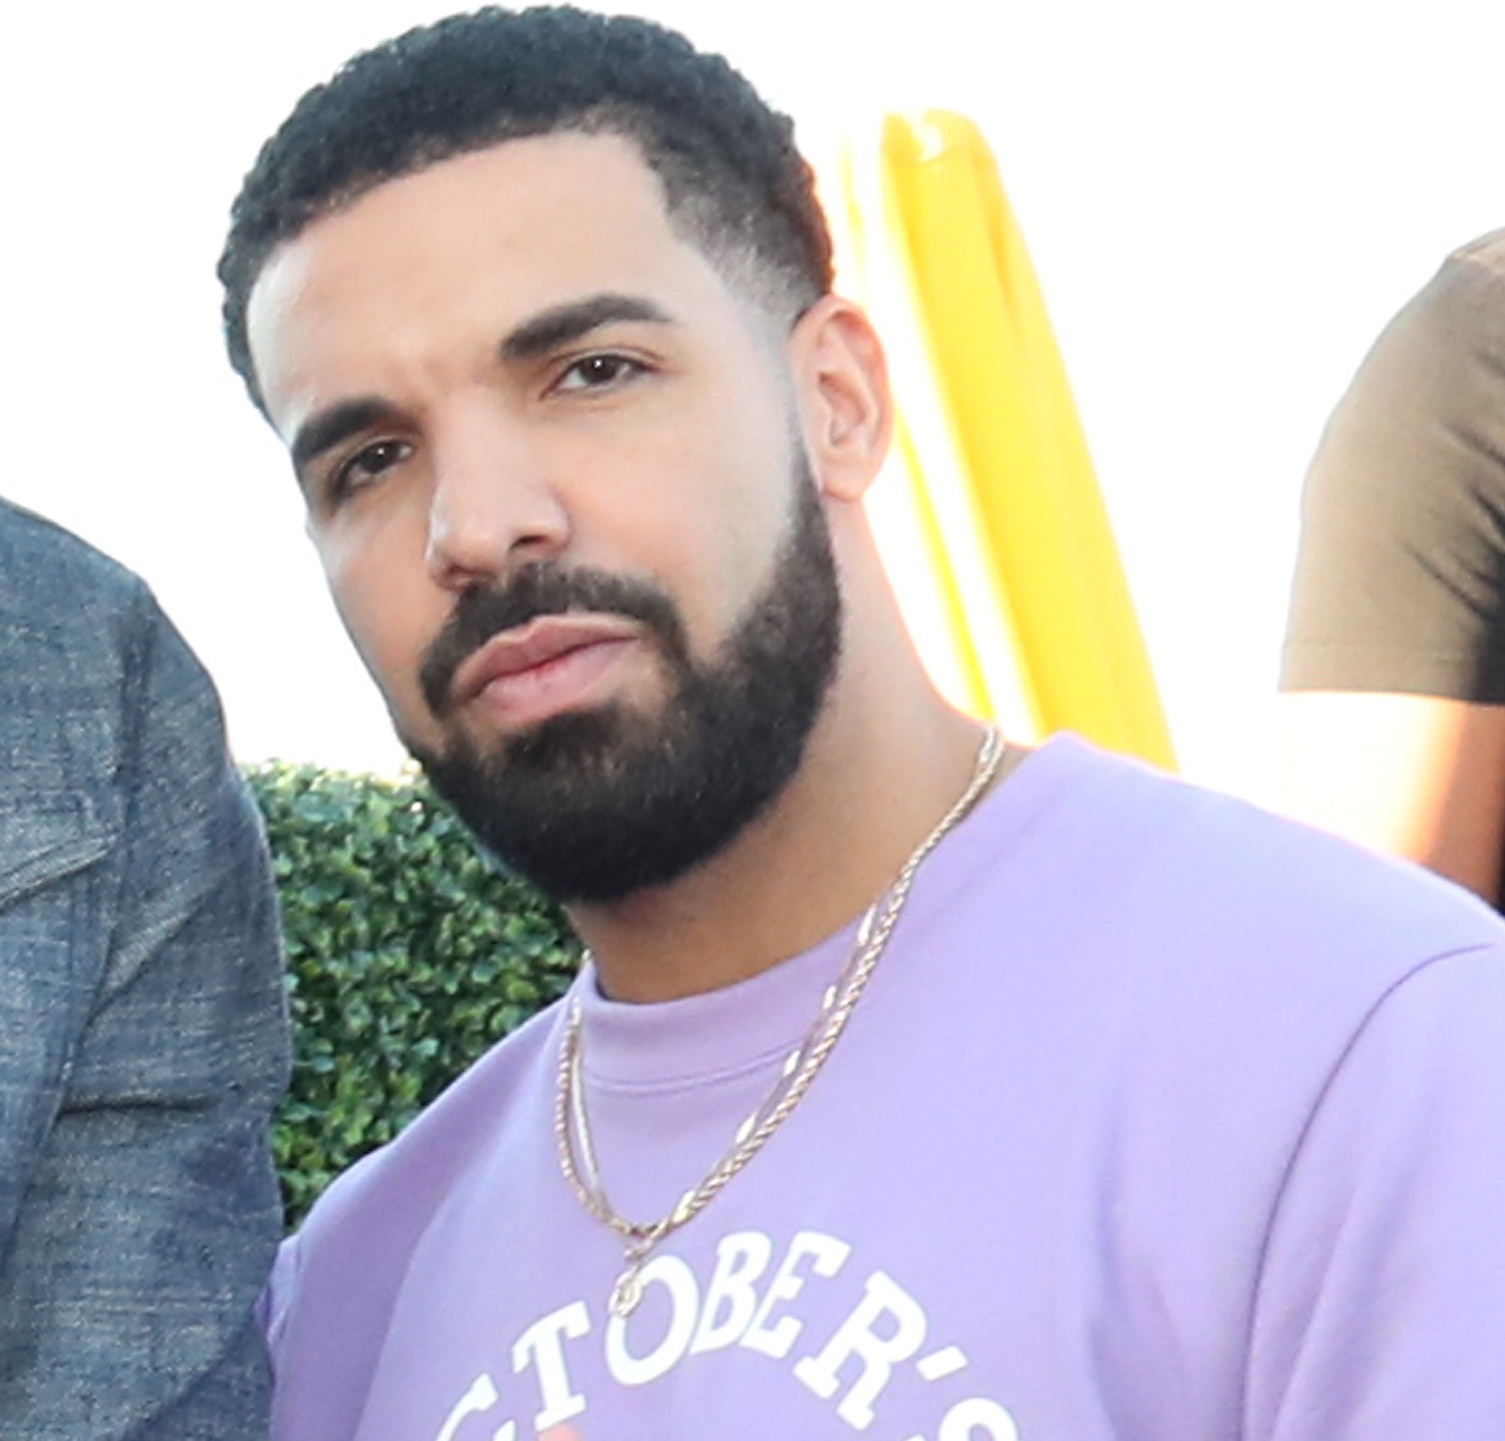 Drake Surpasses The Beatles For Most Top 10 Songs In A Year | The ...